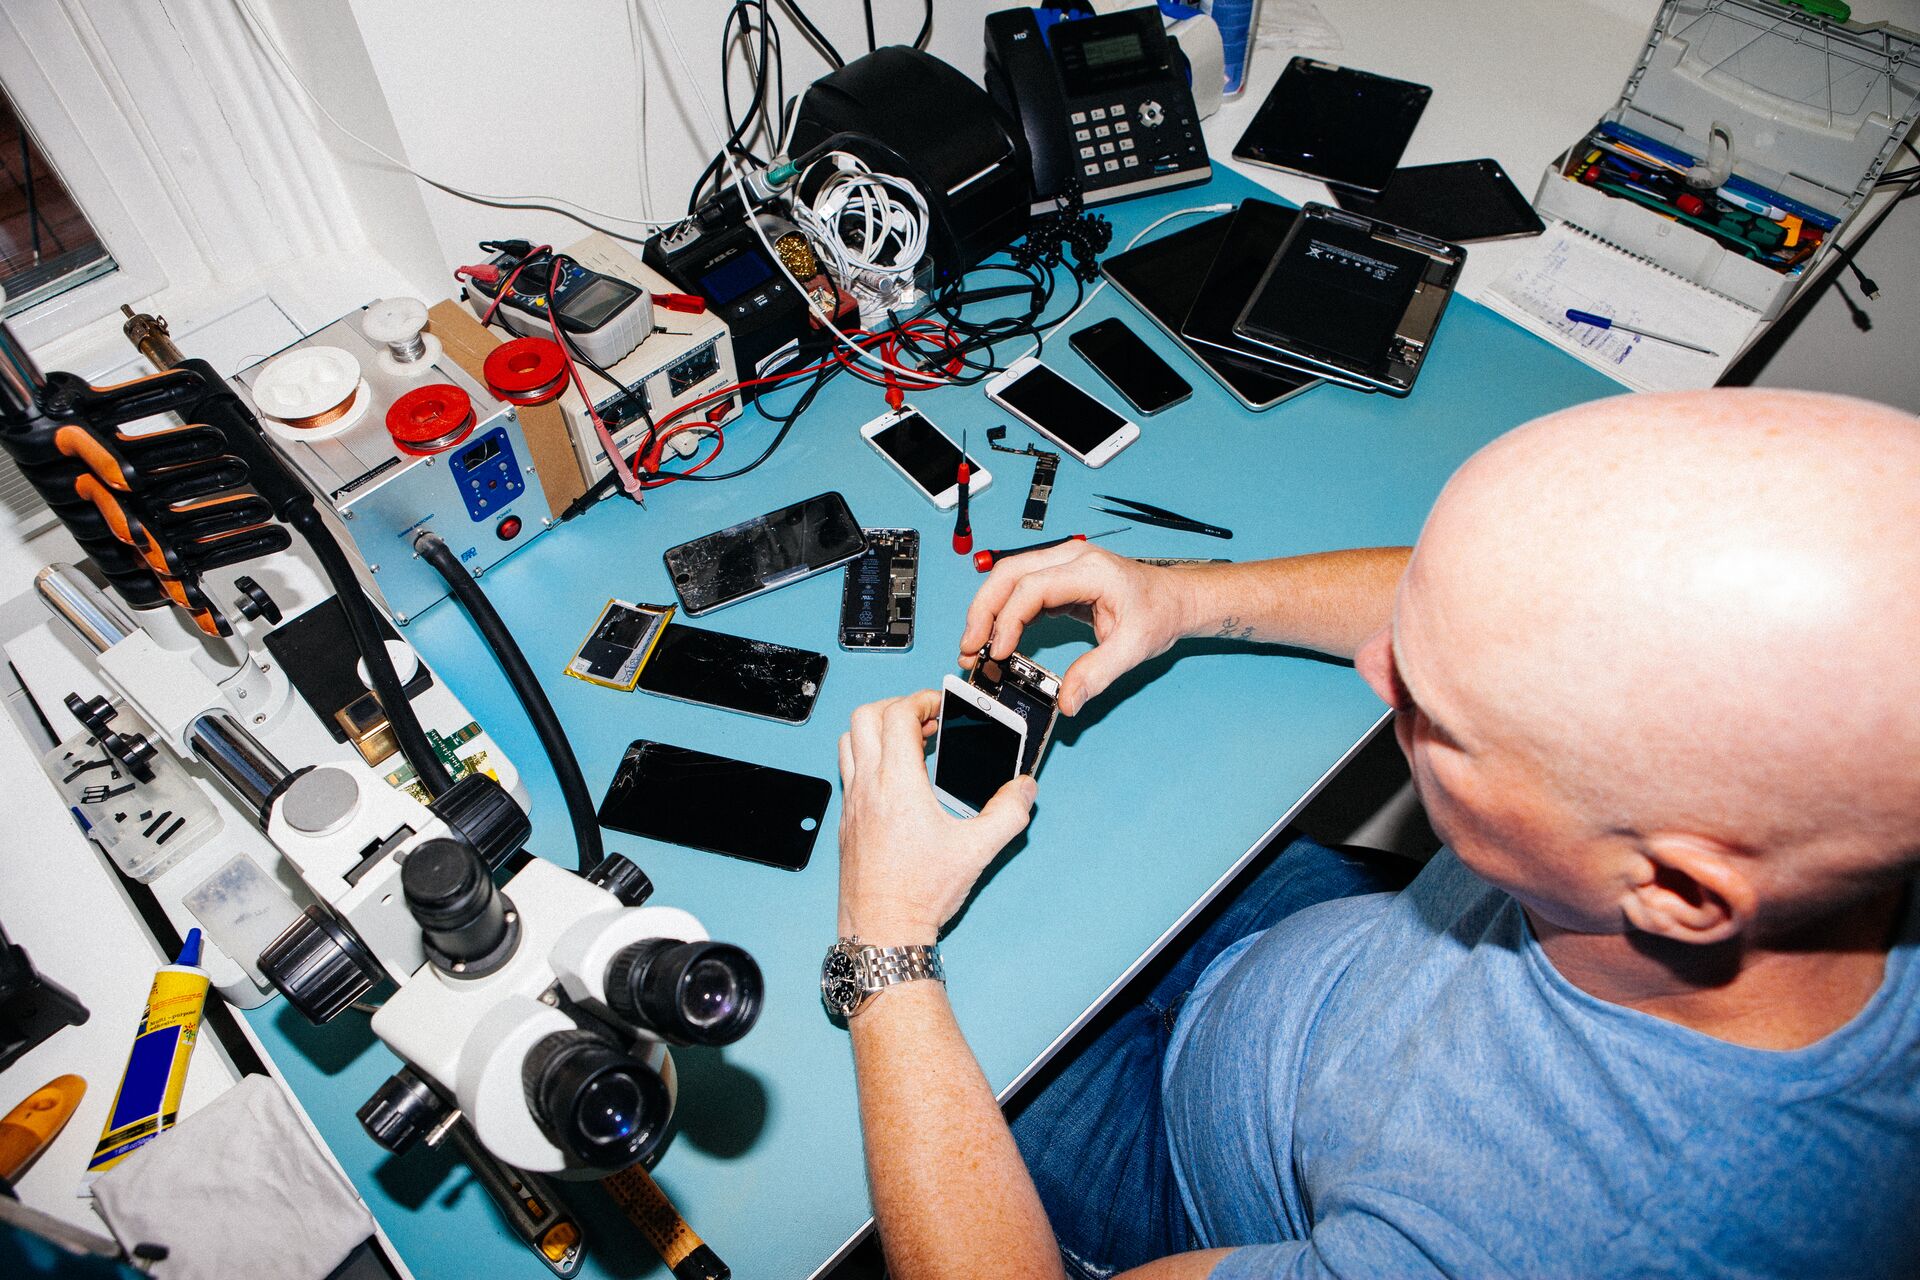 Large_MS PPT_Web-A bald male technician repairing mobile phones behind his desk at work.jpg